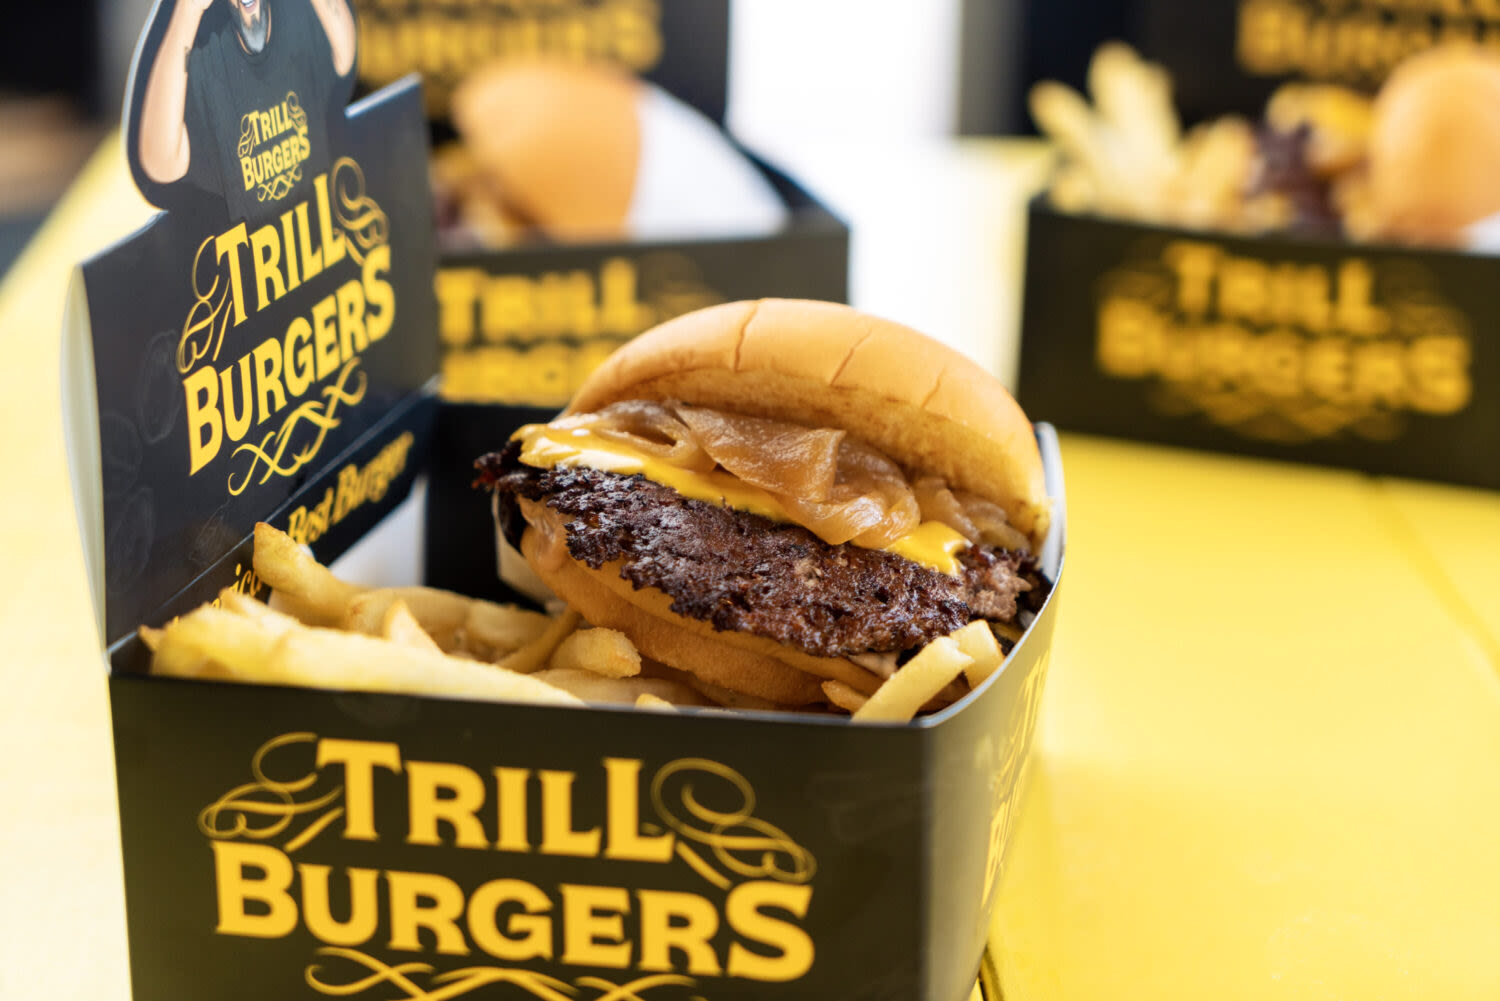 Trill Burgers can stay open but must restrict assets as legal battle between co-founders unfolds, Houston judge rules | Houston Public Media